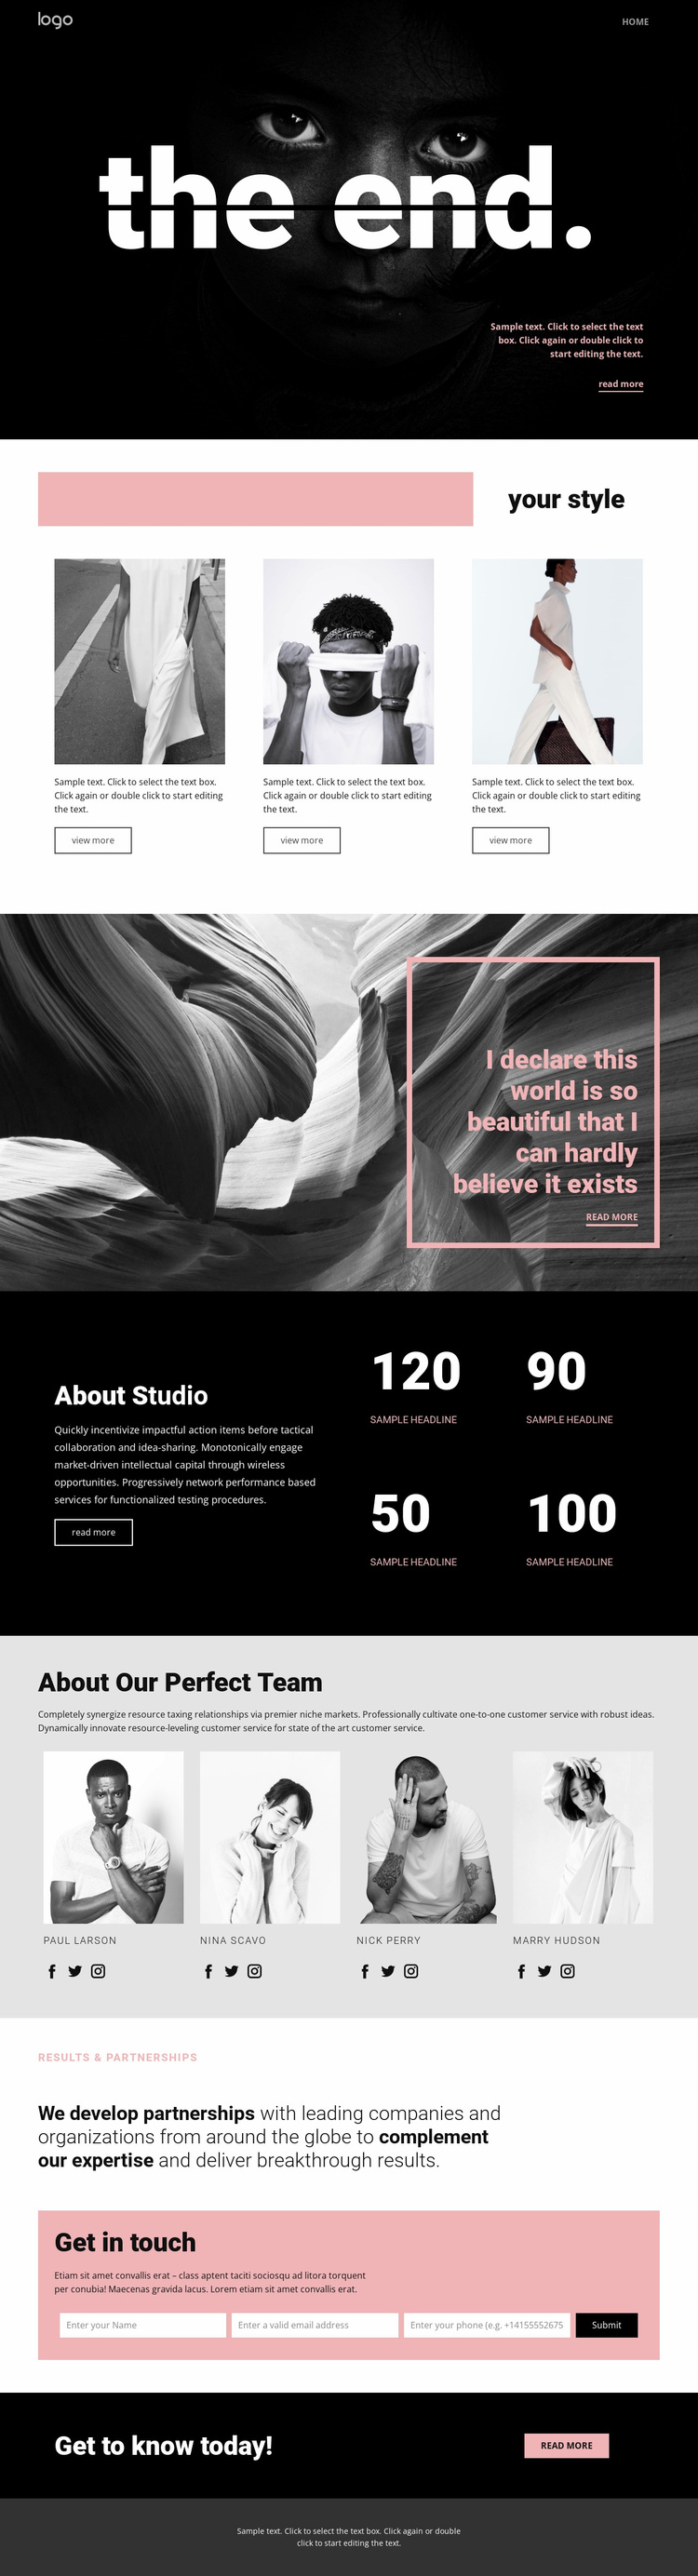 Perfecting styles of art Website Template